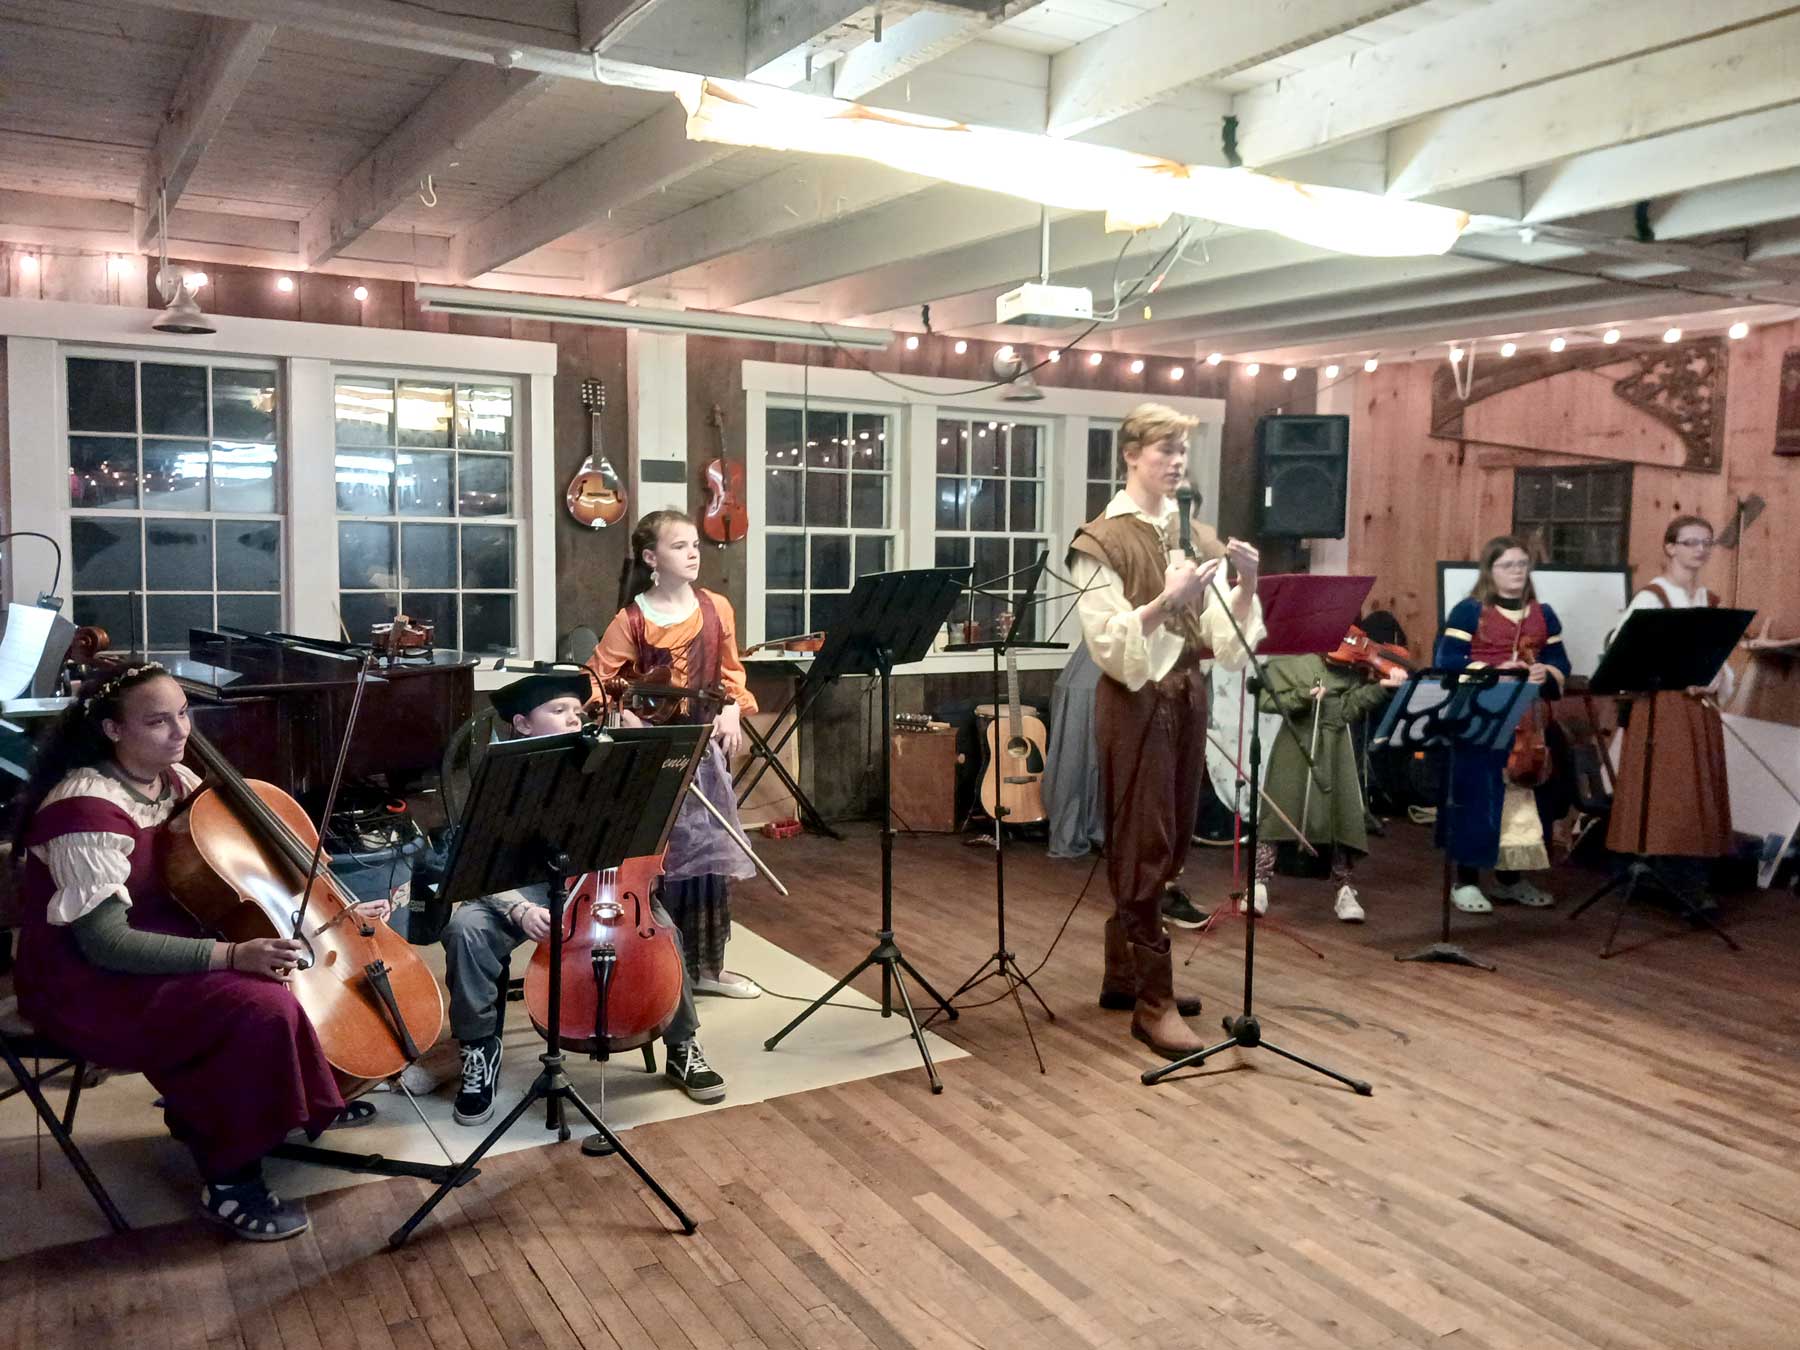 Musicians of the Fiddlehead Field Kids Orchestra in Renaissance garb